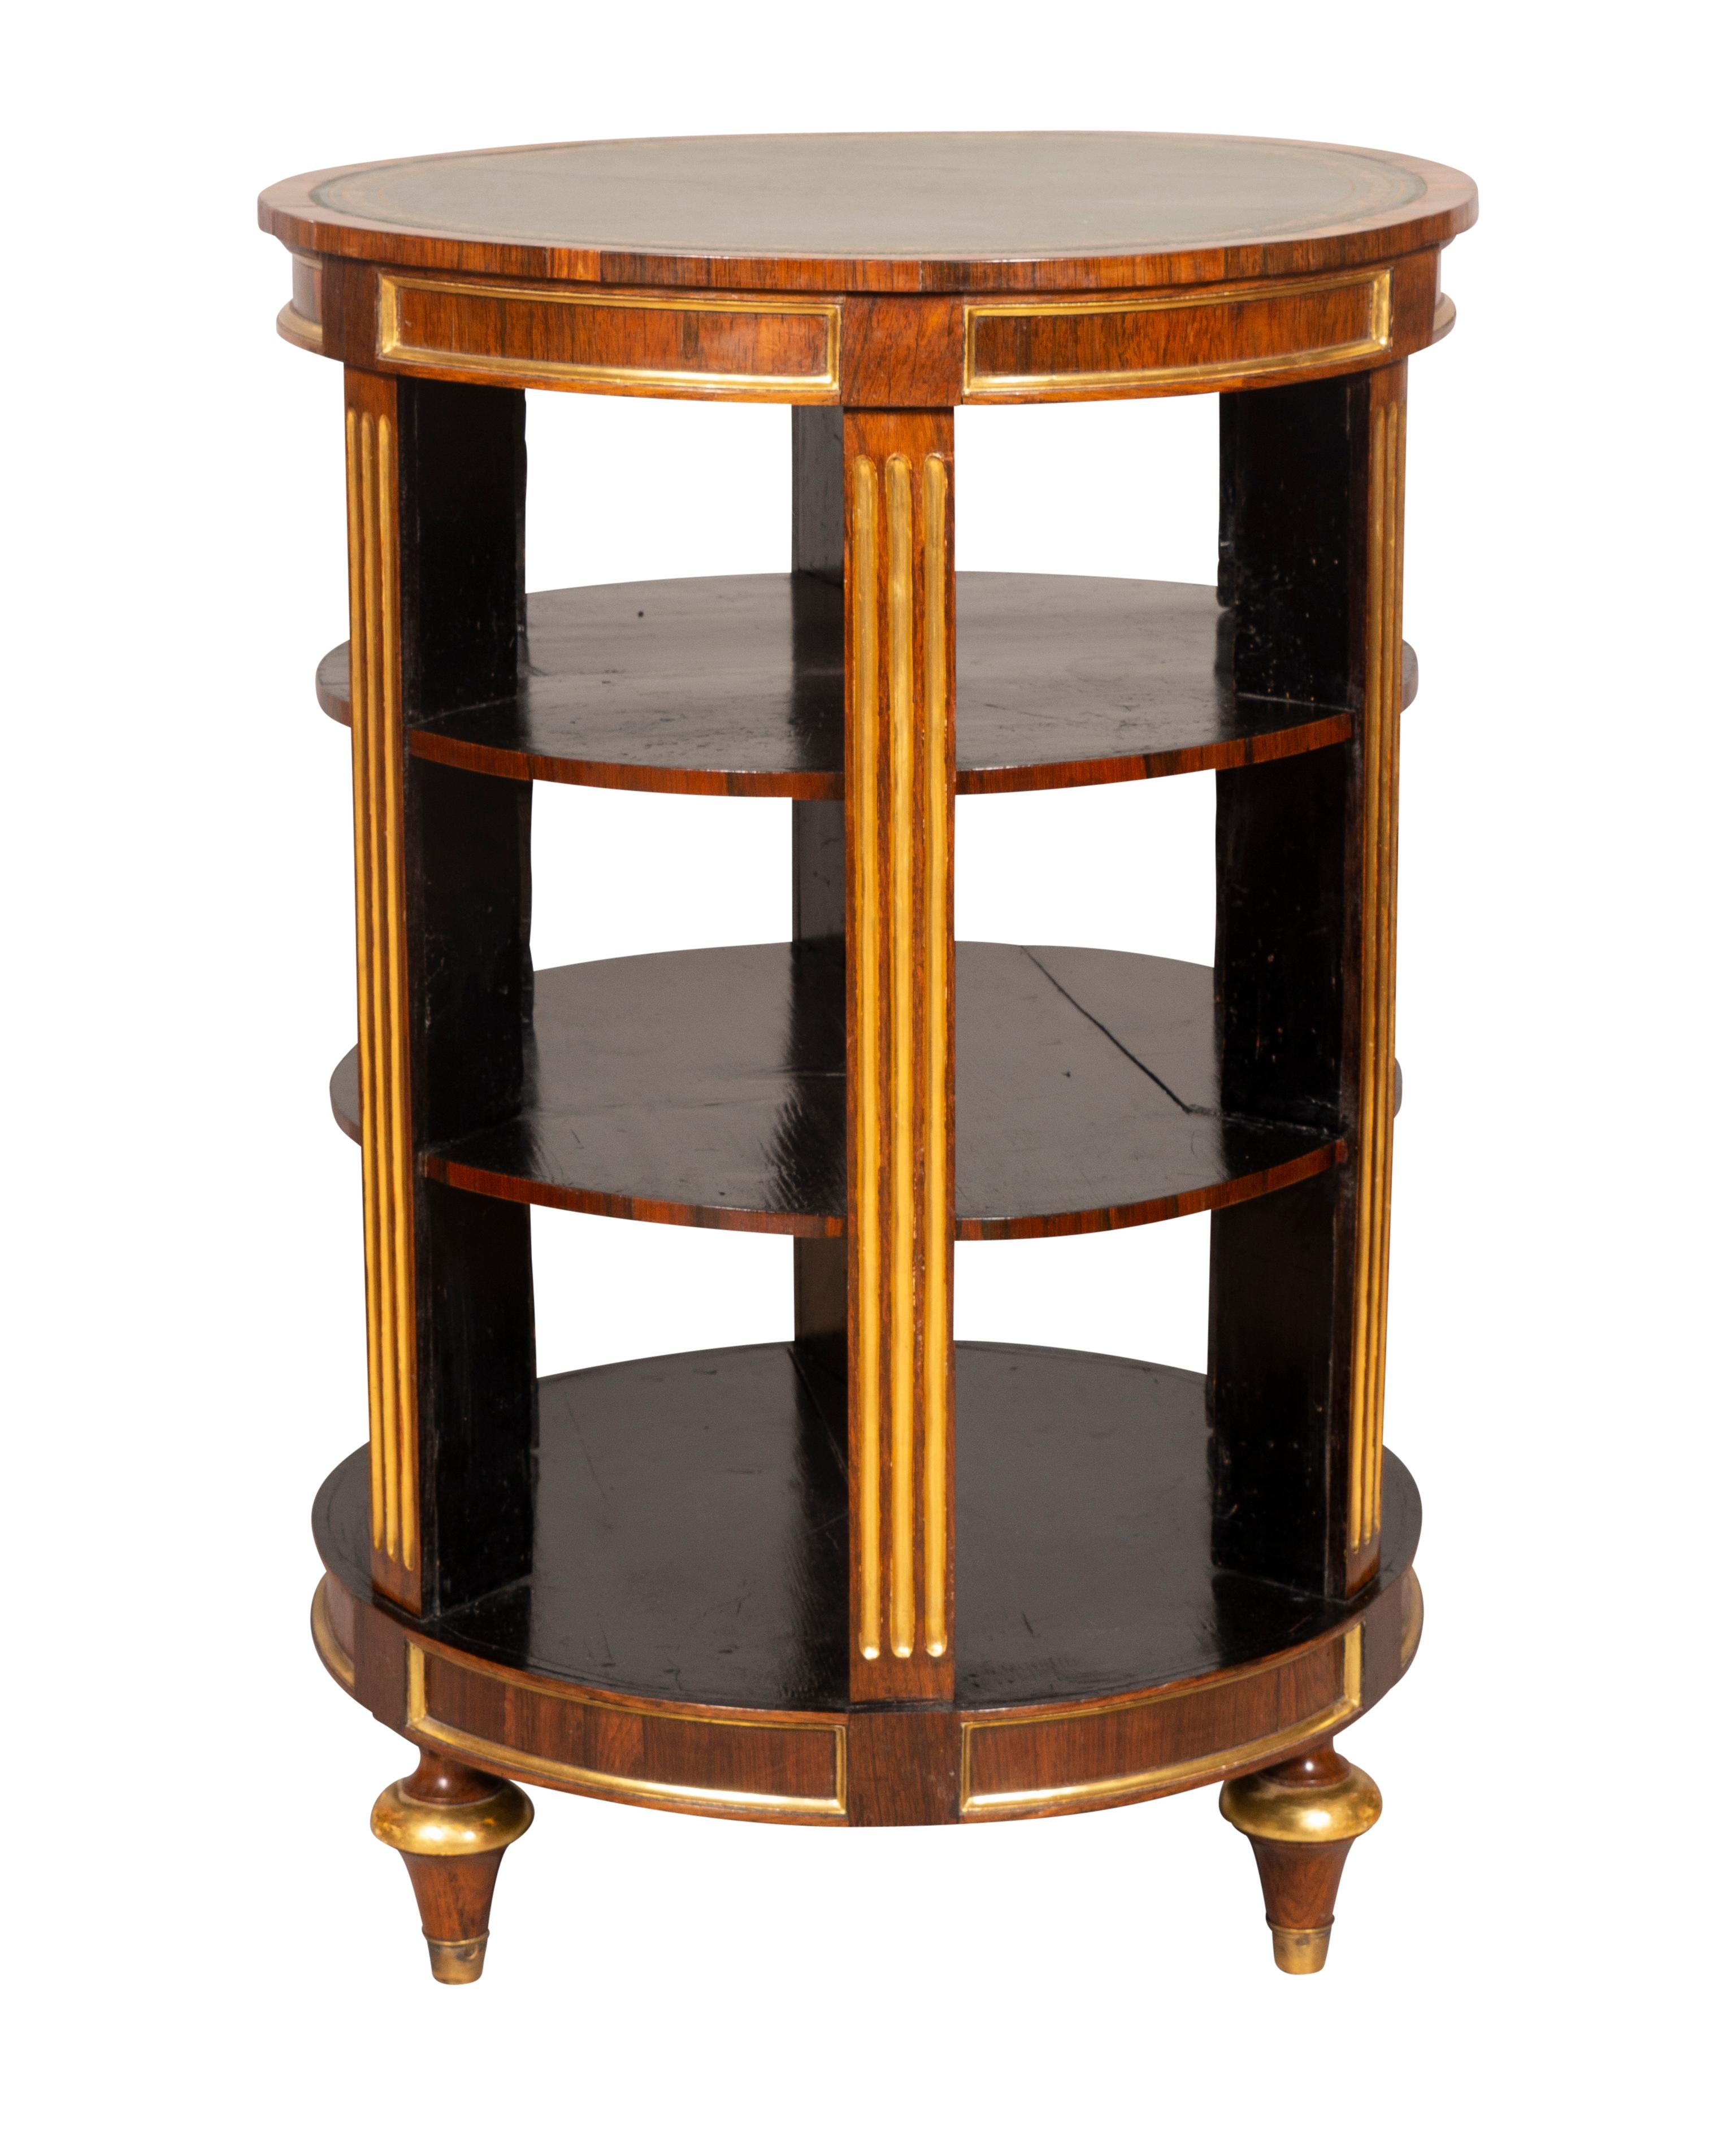 19th Century Regency Rosewood And Giltwood Cylindrical Book Stand